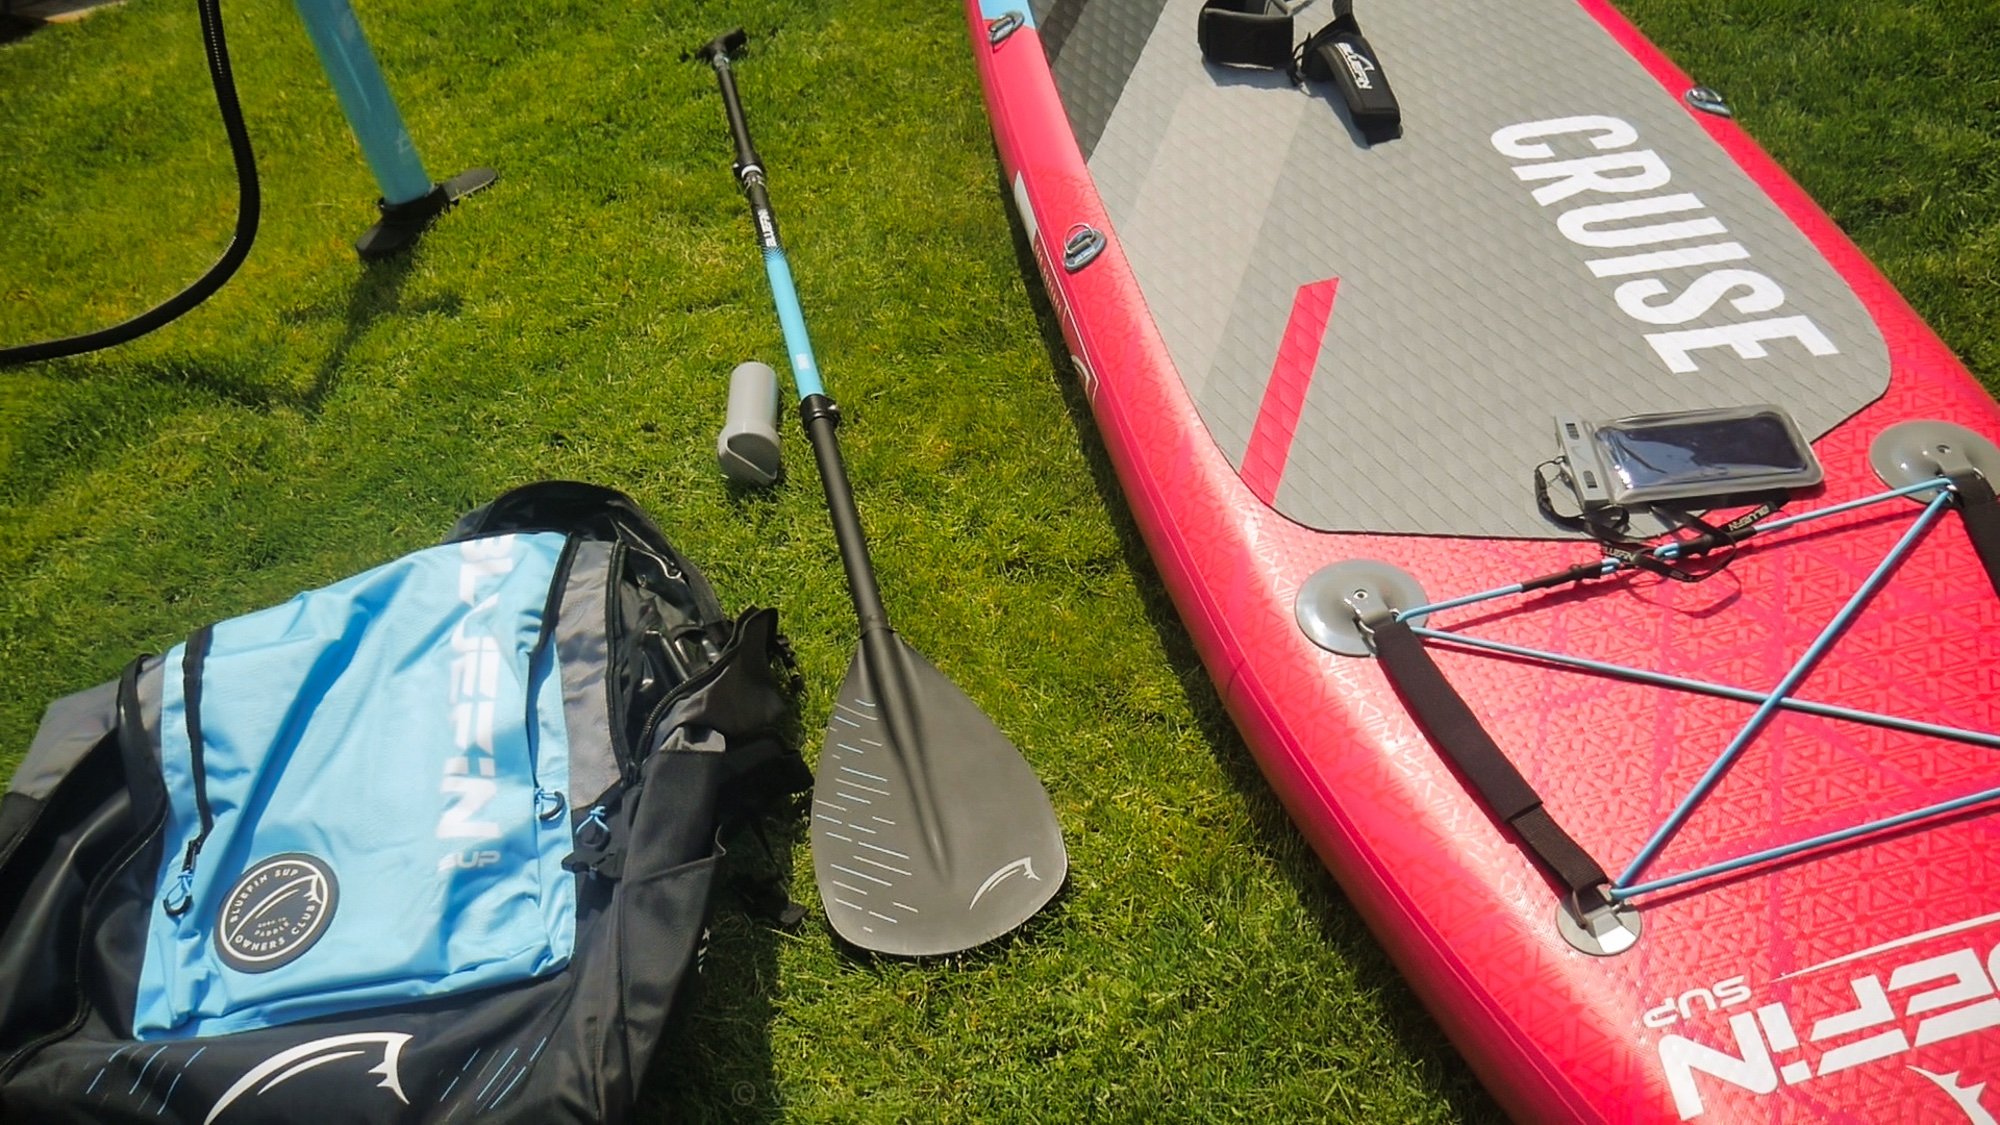 The SUP, bag, pump, and paddle